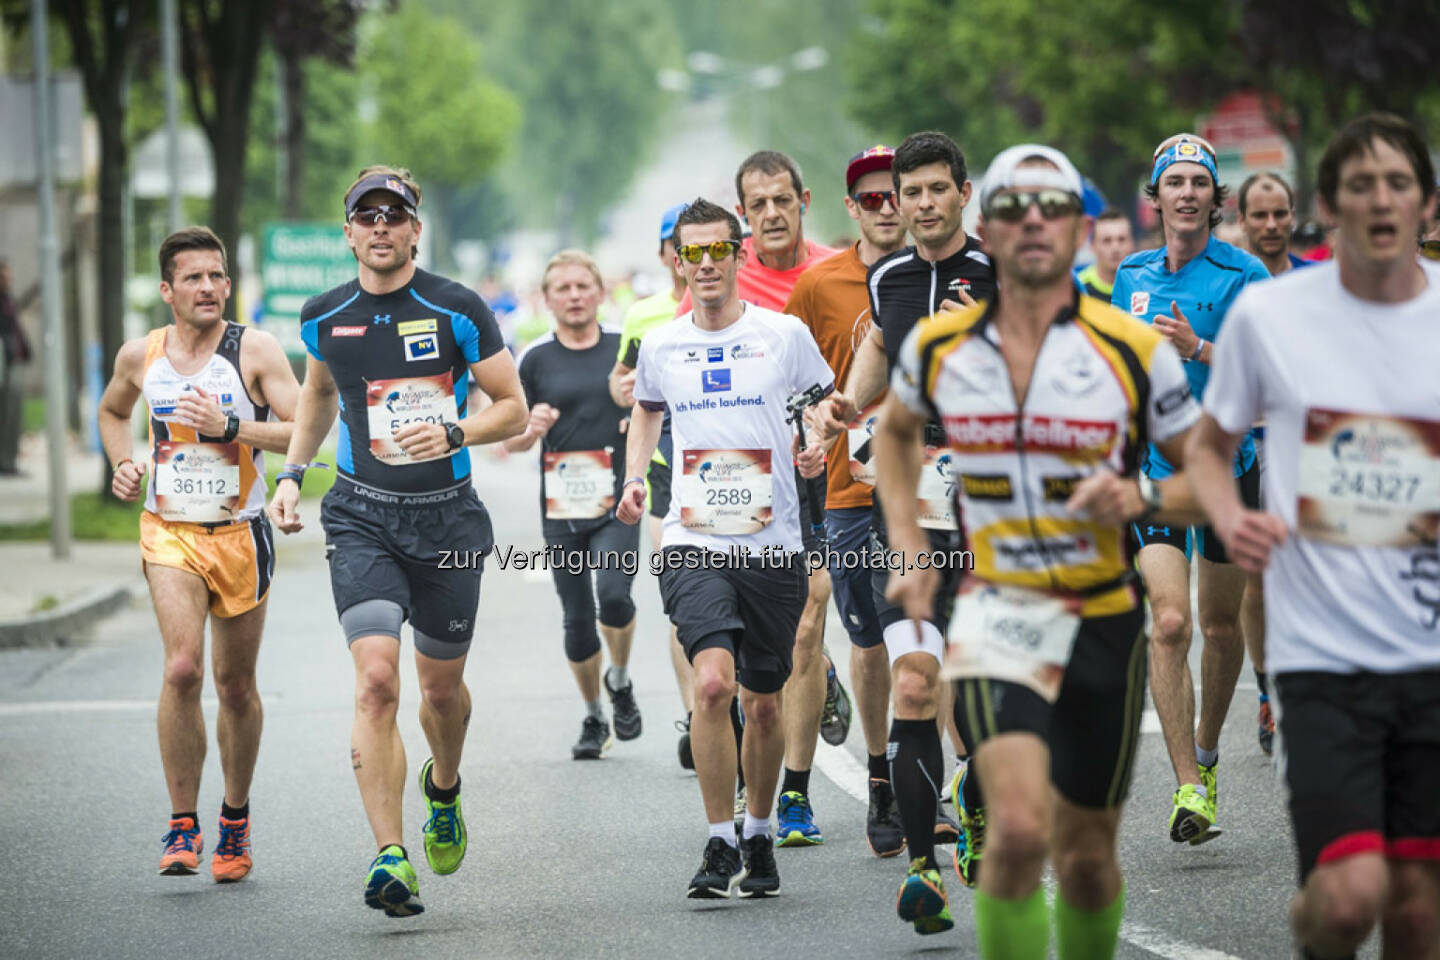 Benjamin Karl runs during the Wings for Life World Run in St. Poelten, Austria on May 3rd, 2015. // Philip Platzer for Wings for Life World Run // Please go to www.redbullcontentpool.com for further information. // 